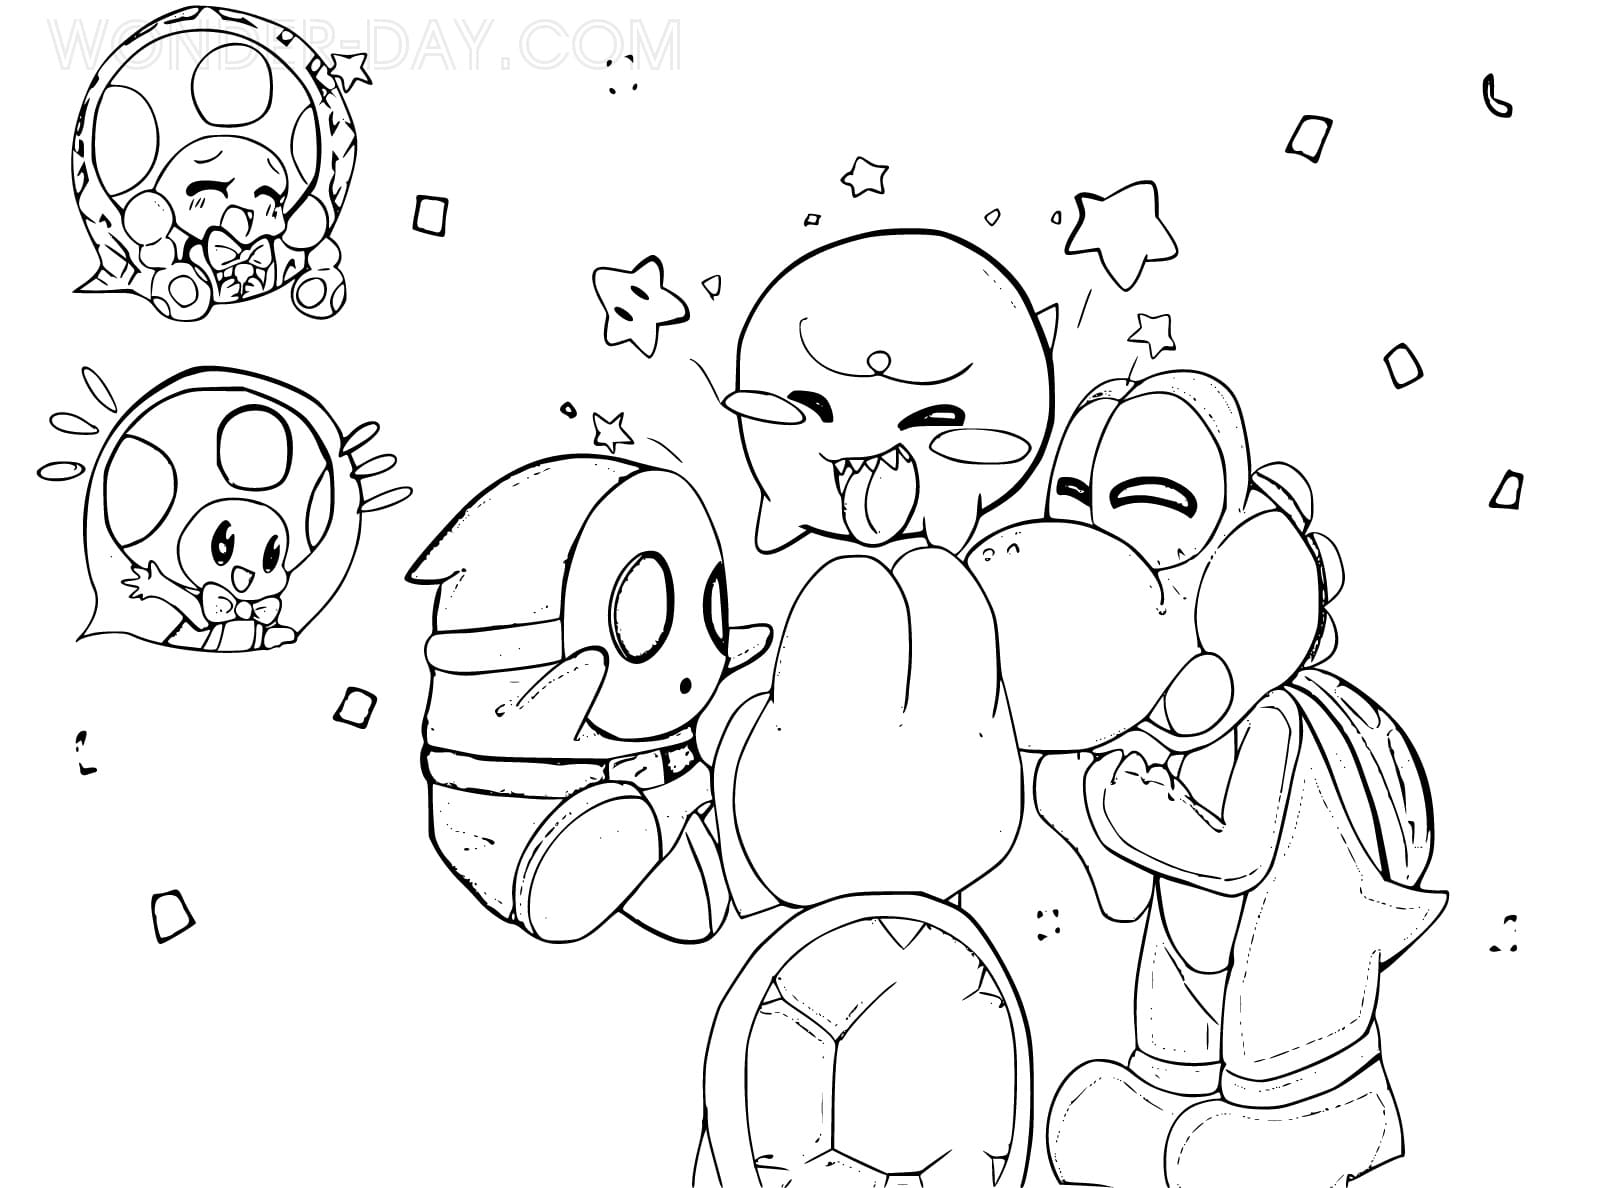 Shy guy mario coloring pages wonder day â coloring pages for children and adults